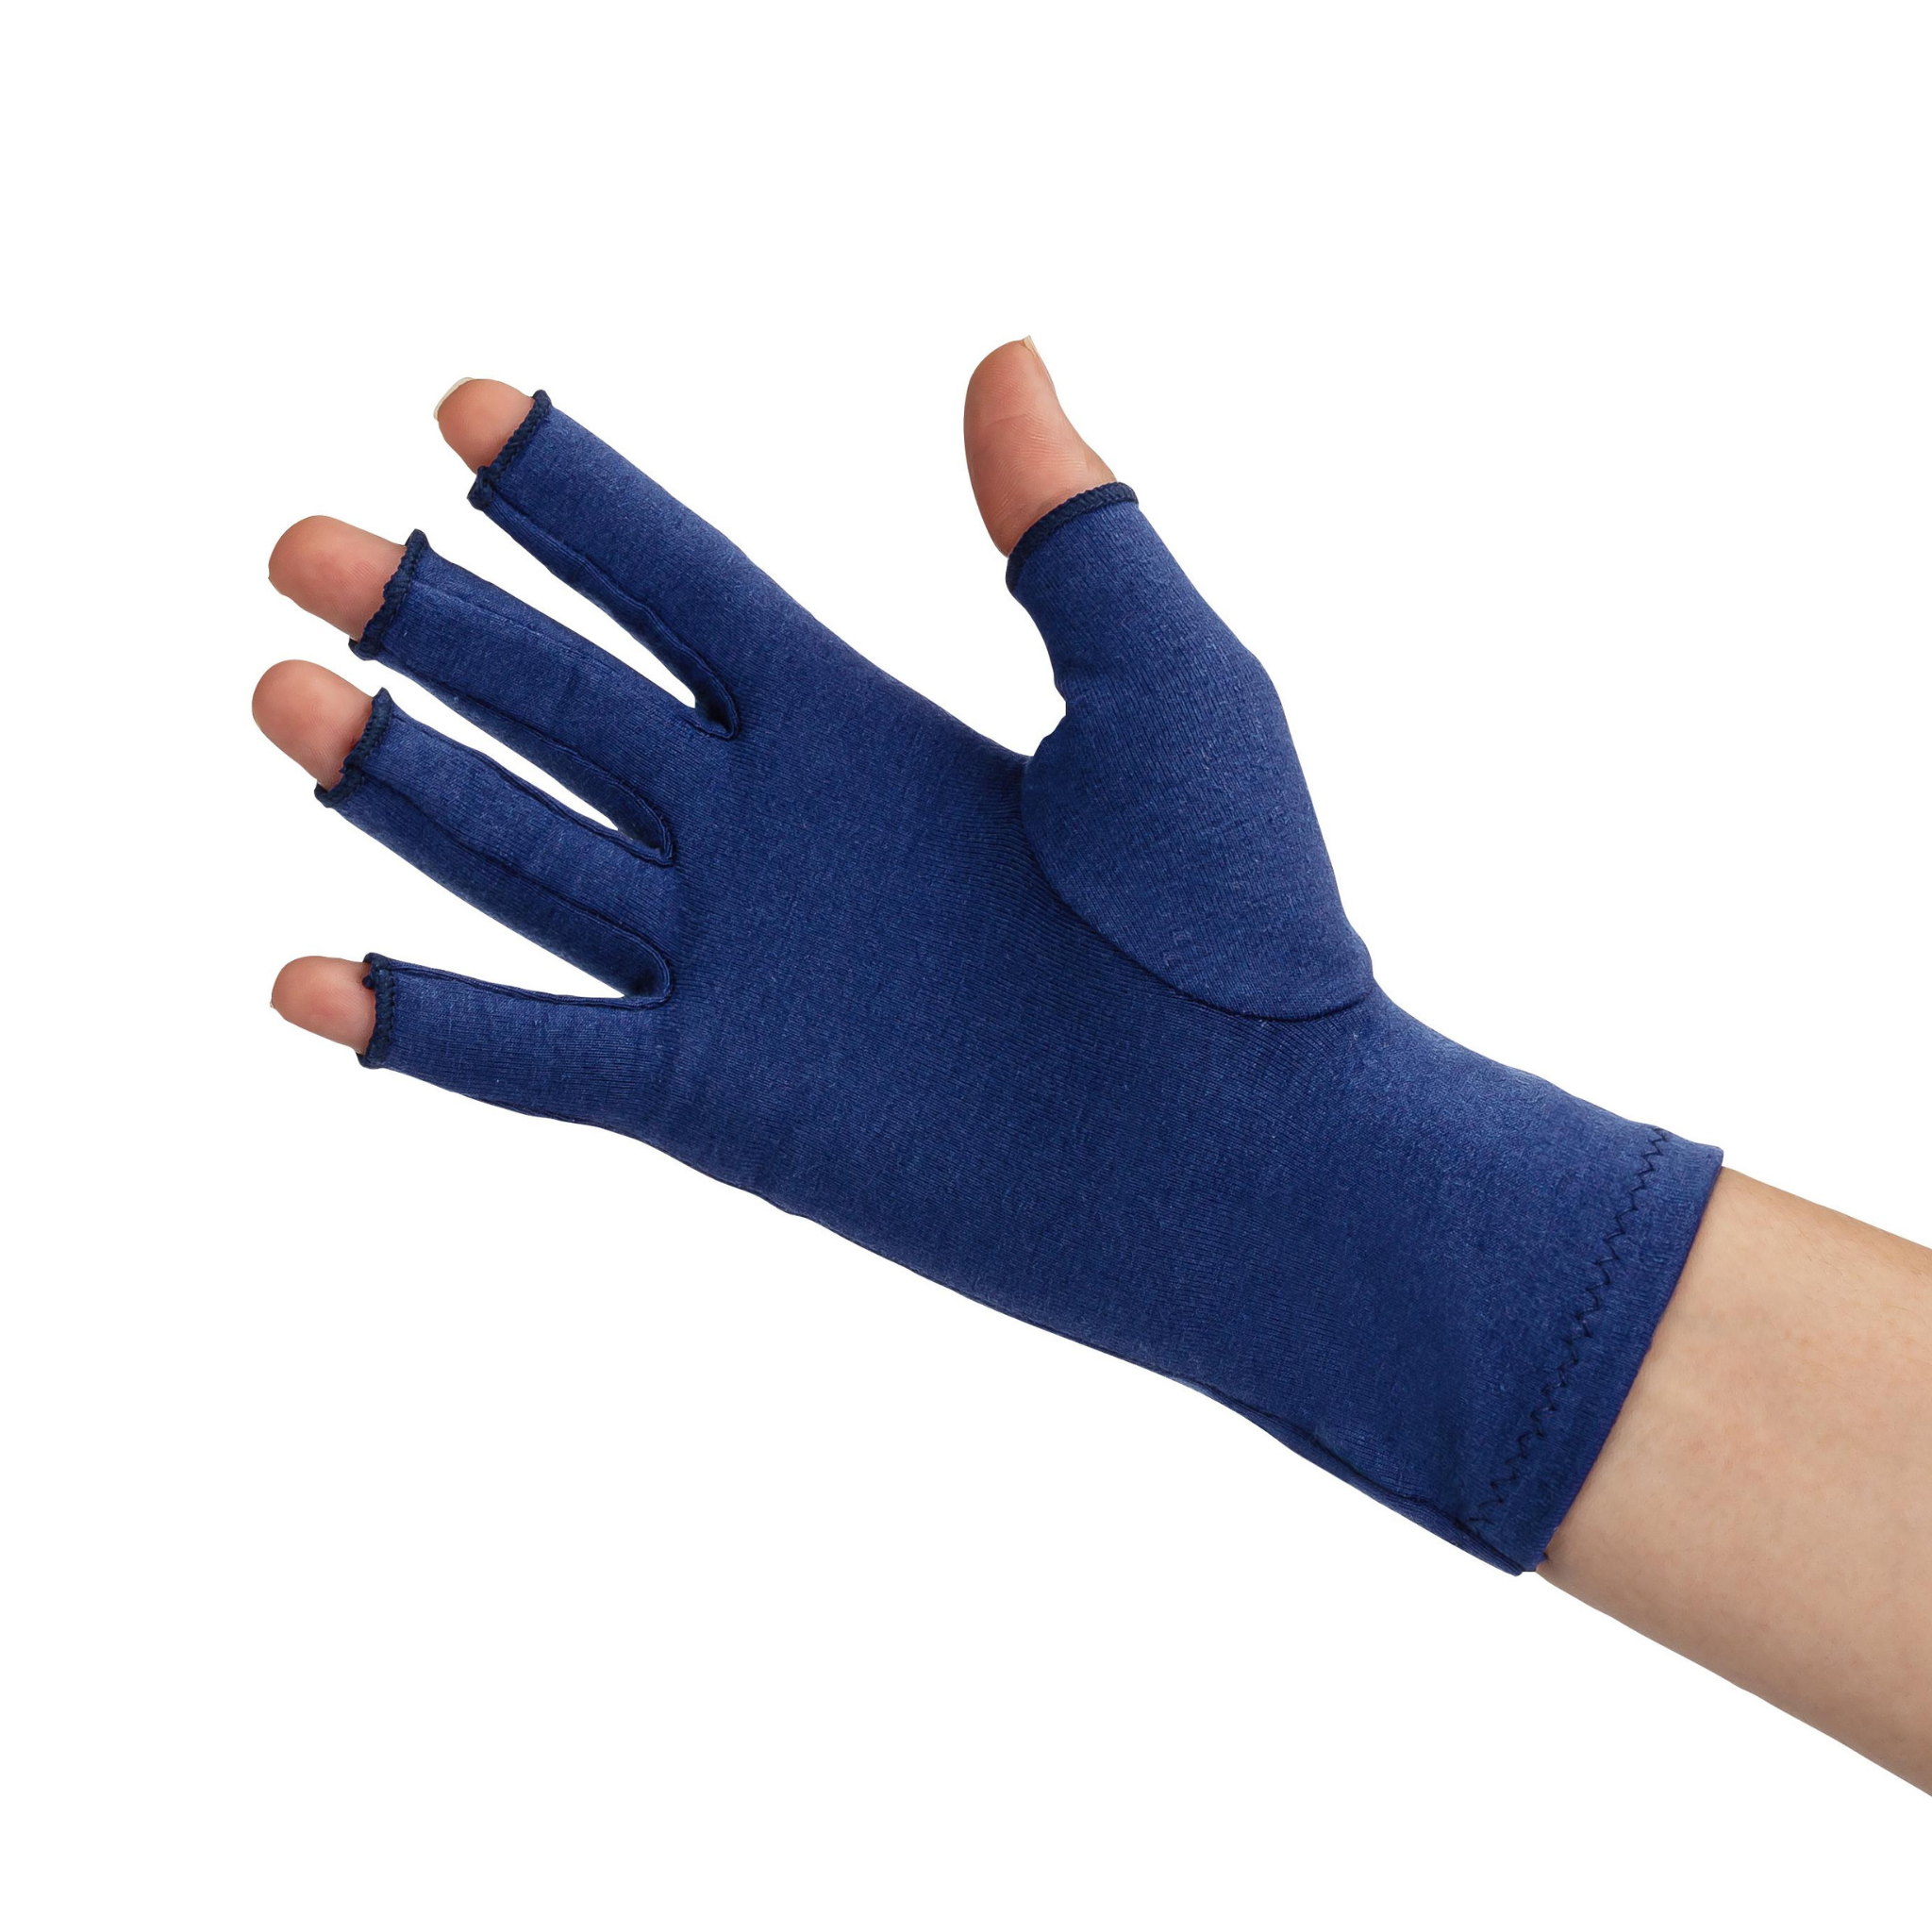 A close up of the hand of a woman with arthritis, wearing a Marine Blue Compression Glove and showing the palm of her hand.